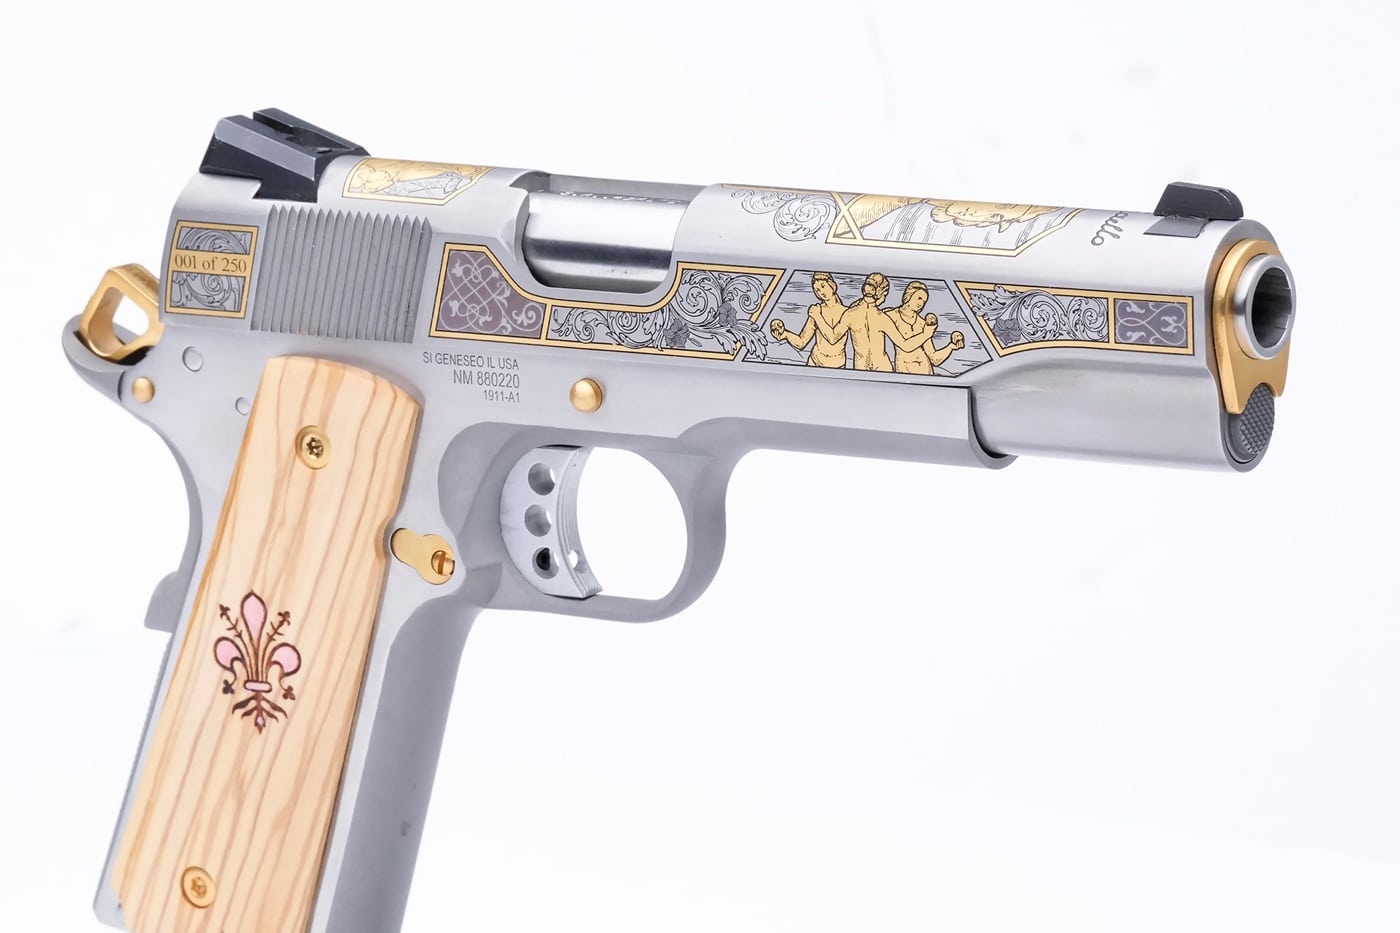 Three Graces reproduced on the slide of a 1911 pistol chambered for the .45 ACP cartridge. Scrollwork engraved into the slide with gold tones.